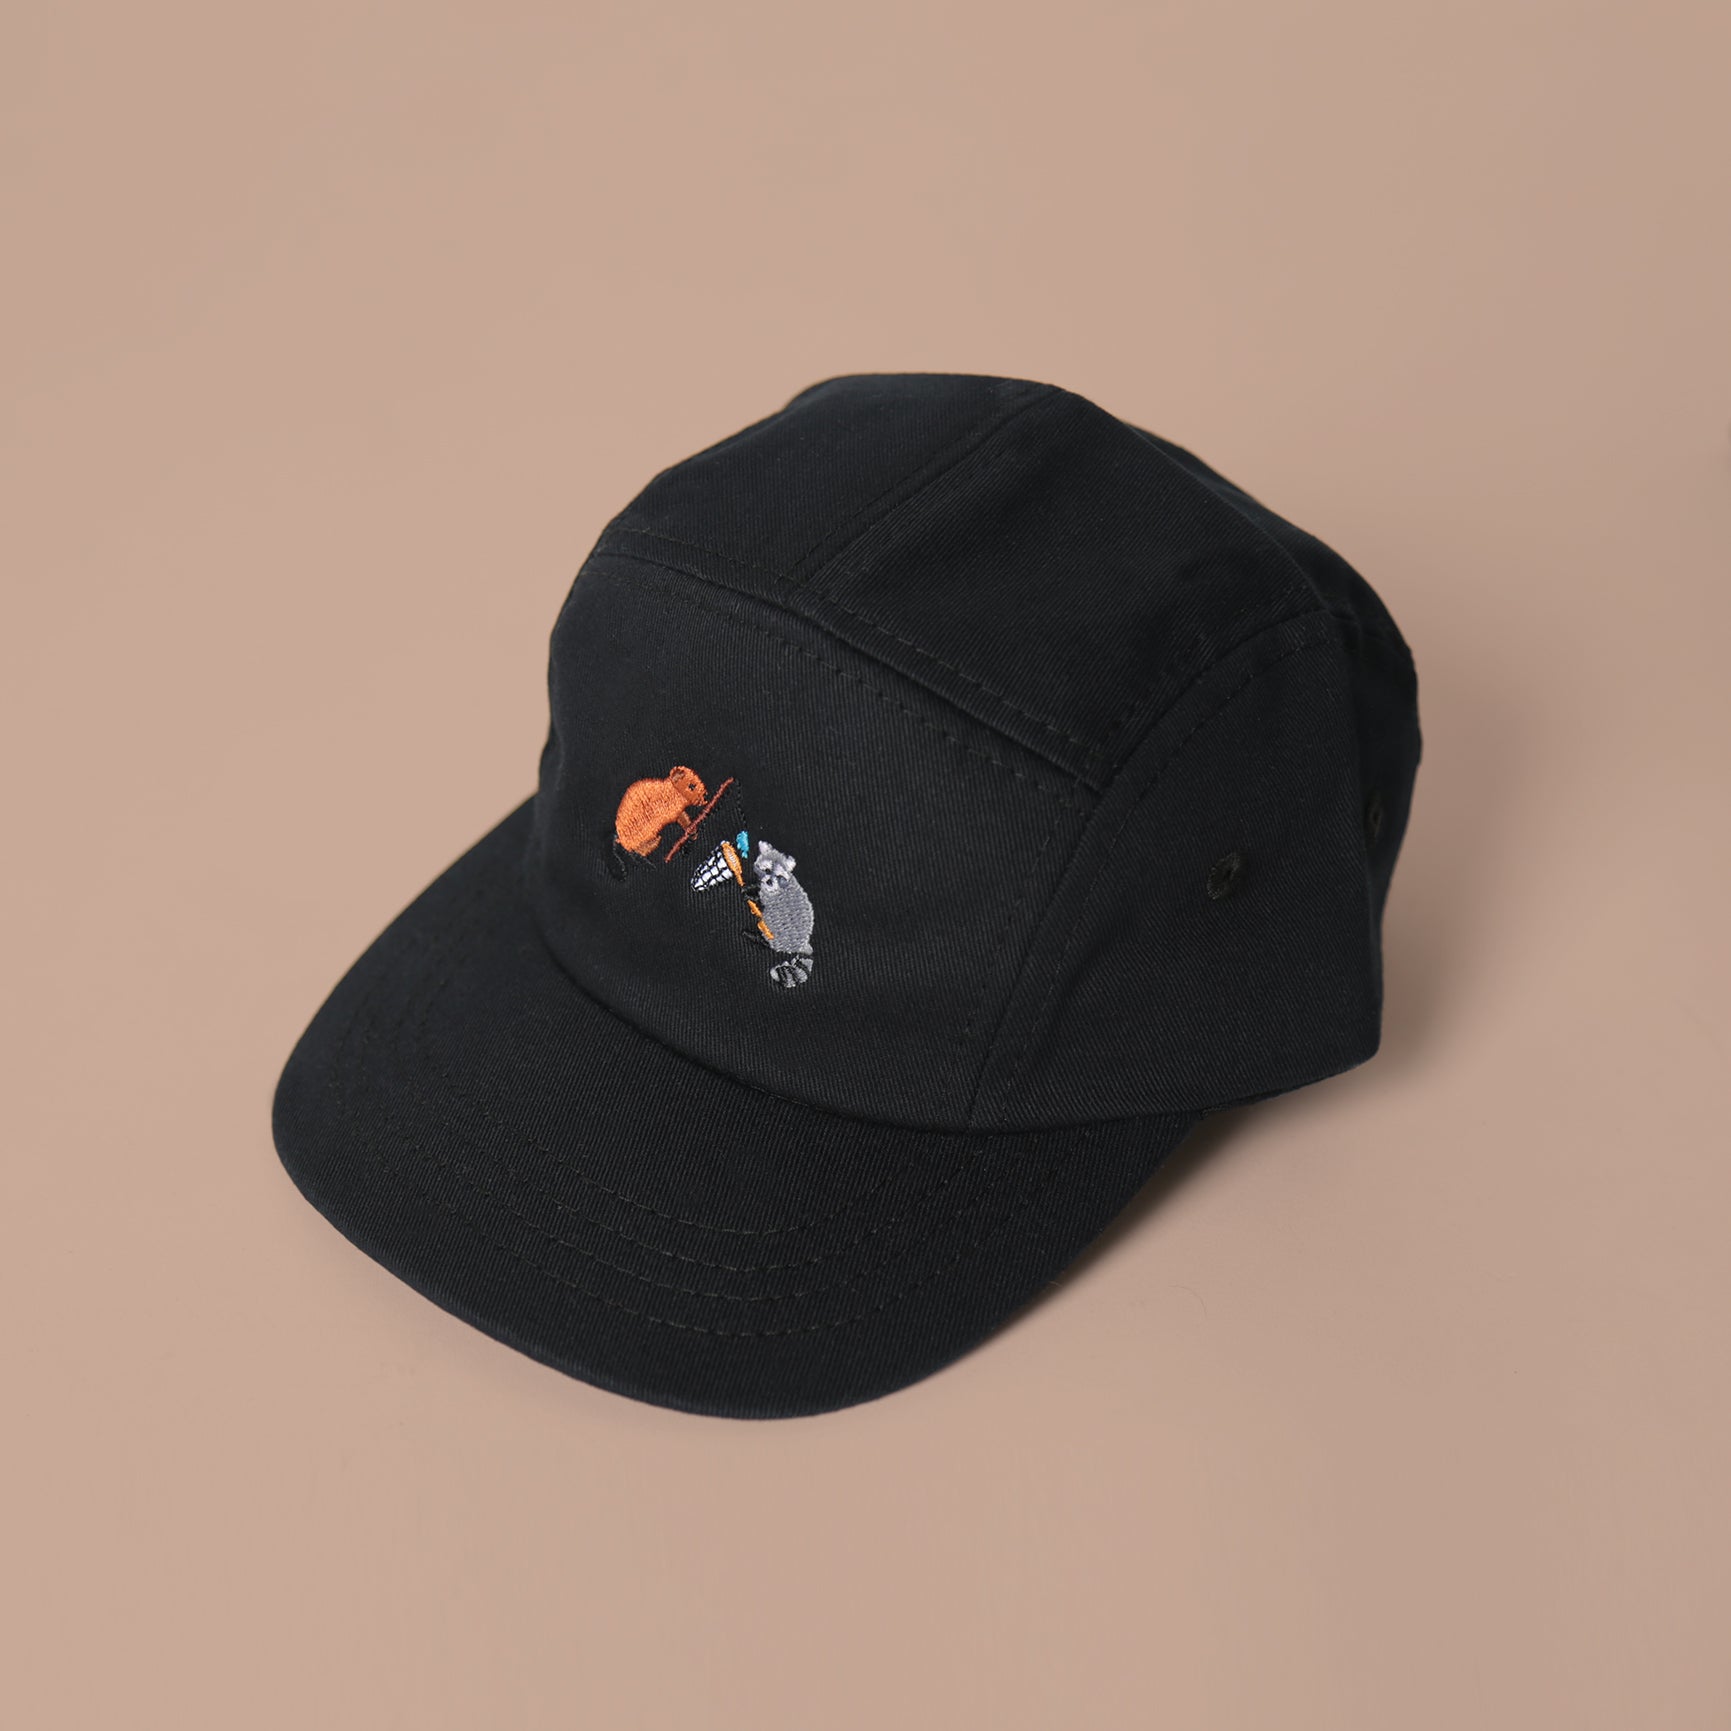 Toddler 5 Panel - Black - Fishin' Friends  Embroidery